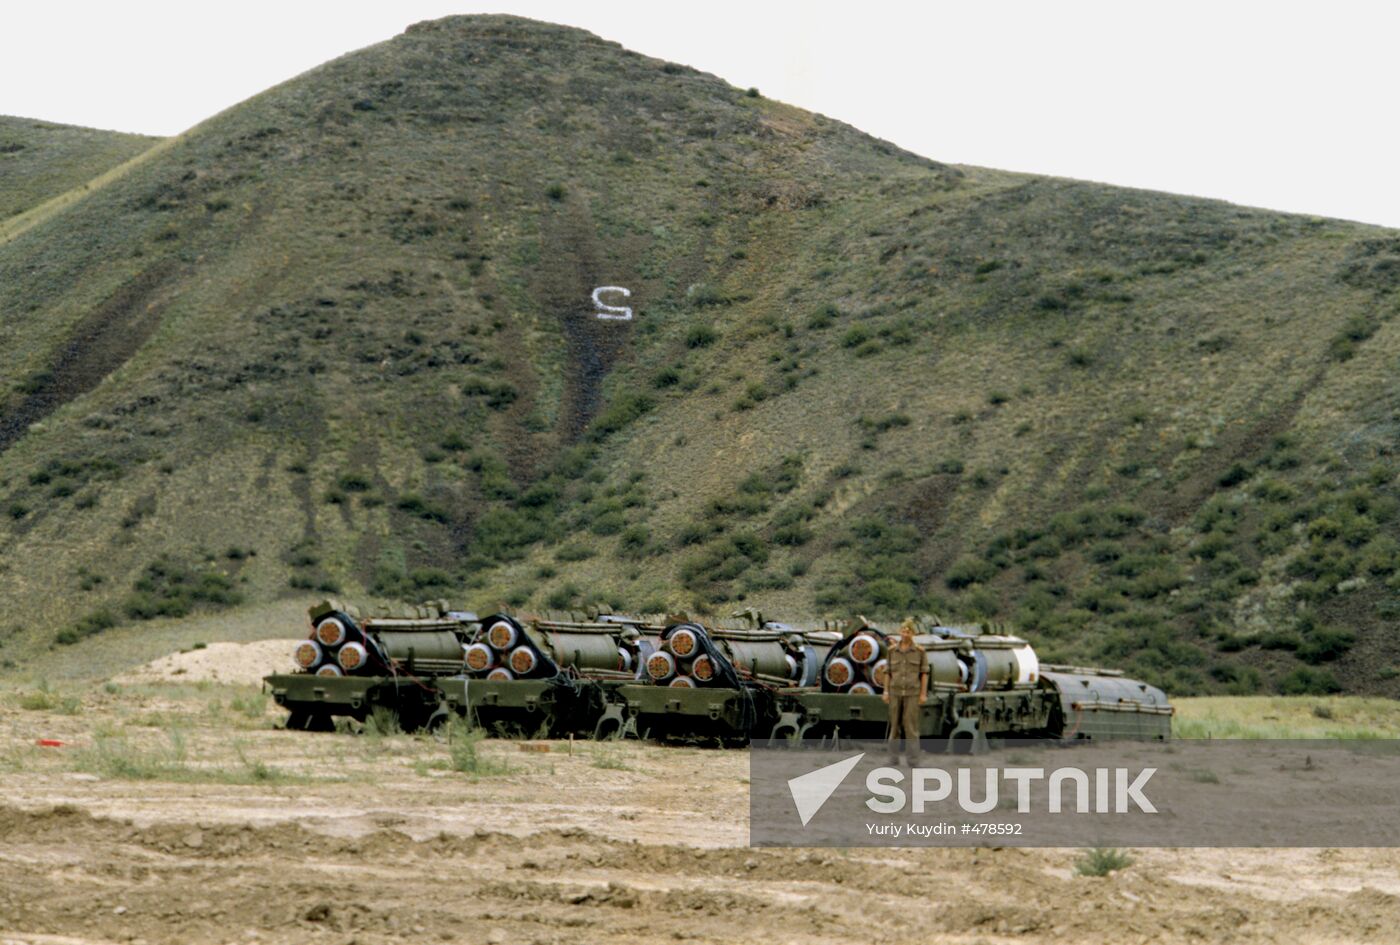 Bunch of four missiles prepared for destruction